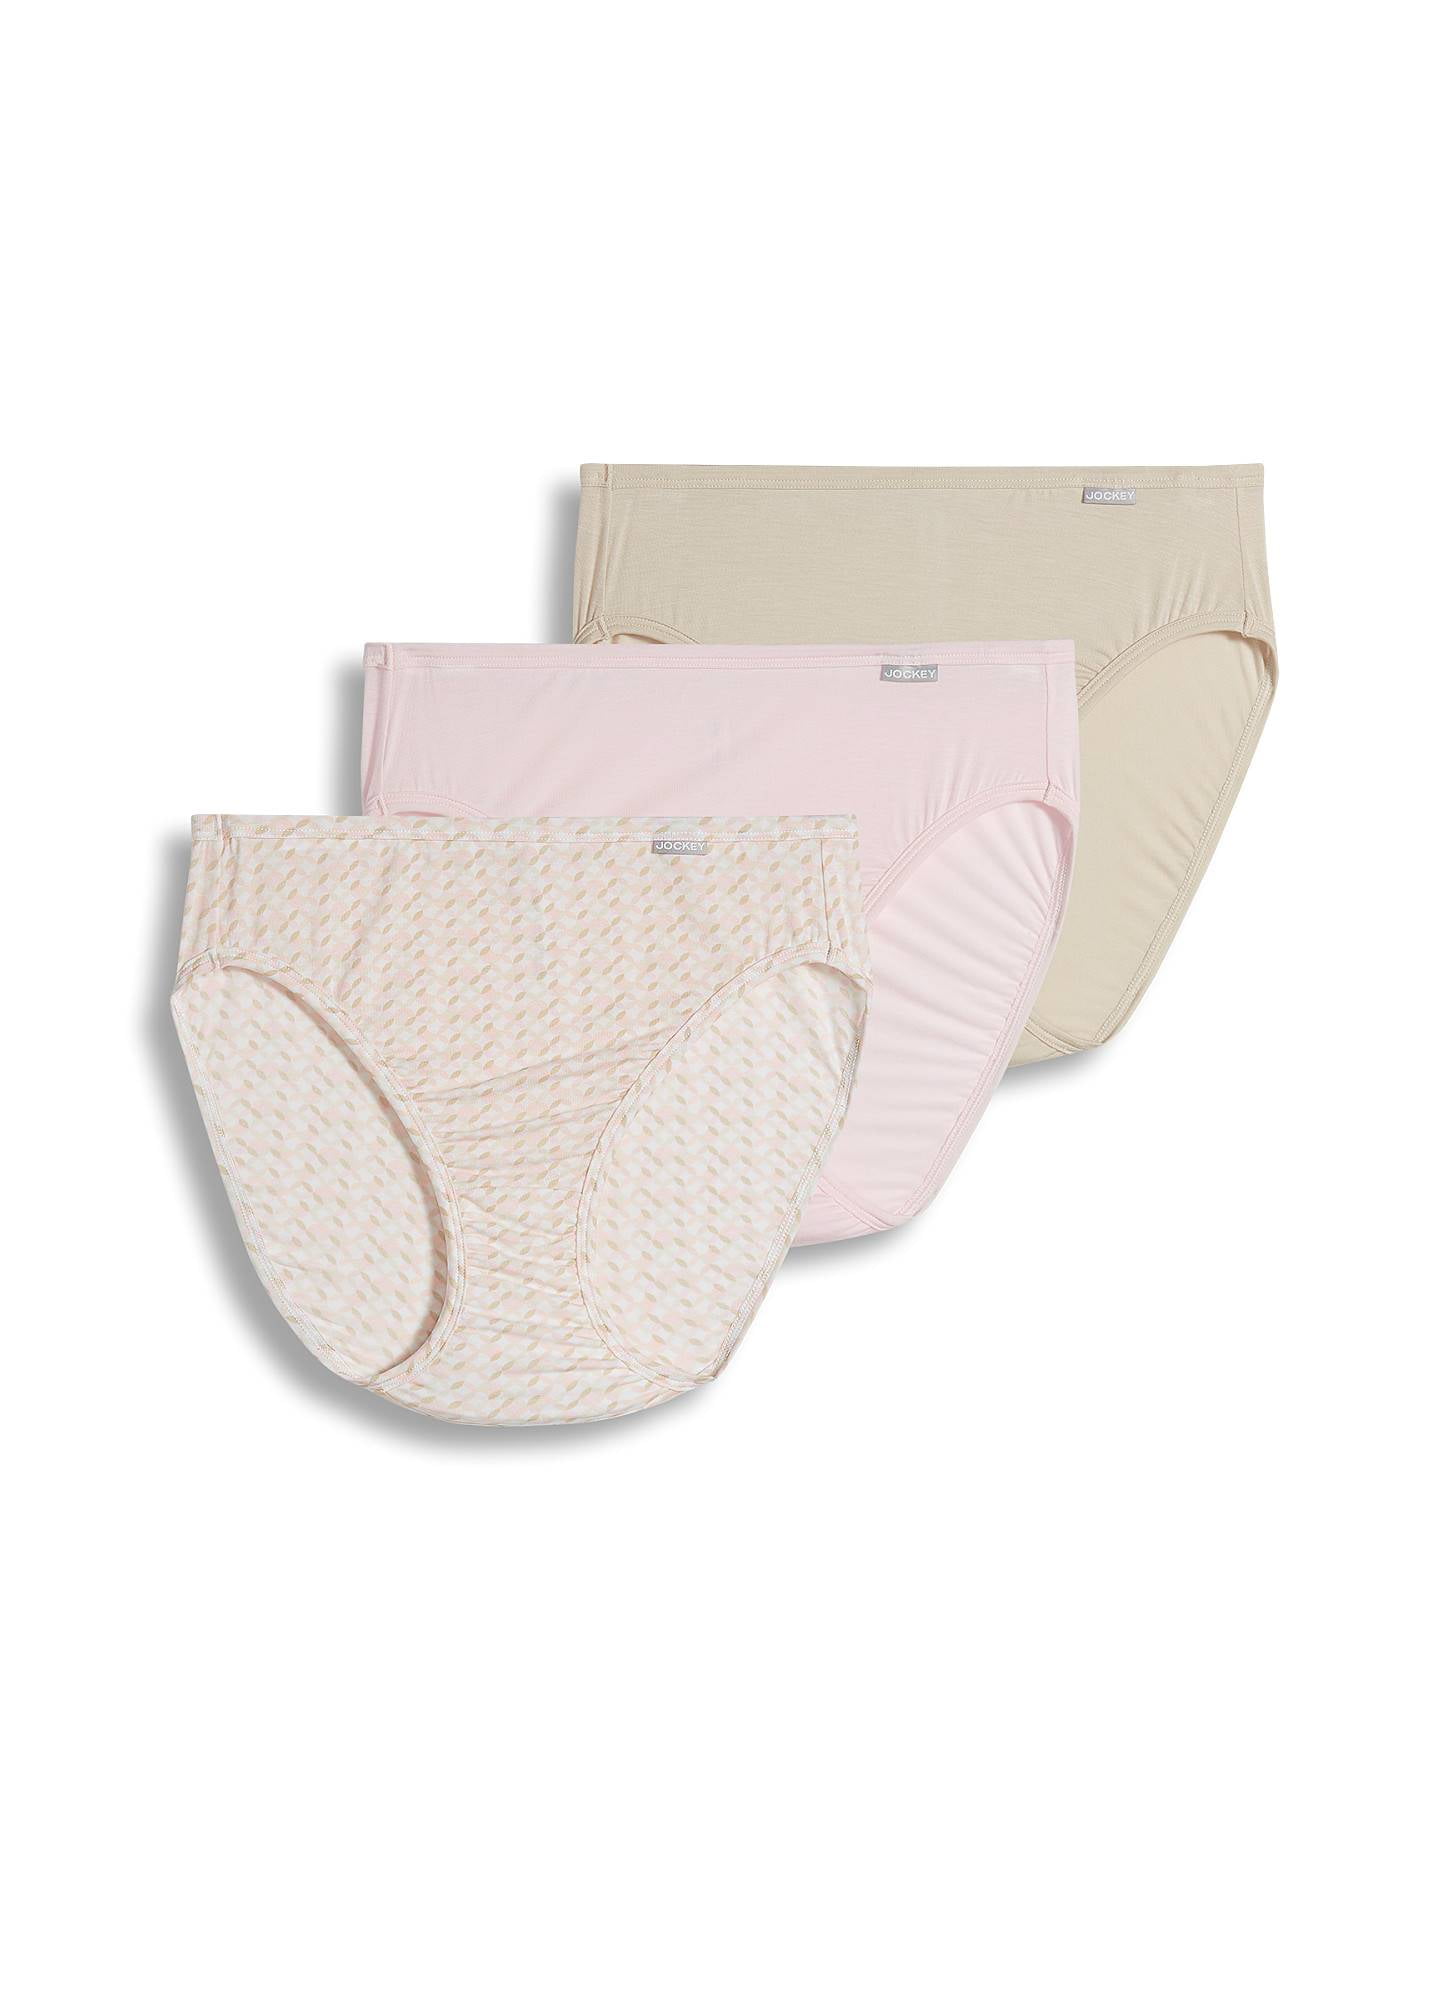 Jockey® 3-Pack Elance® Supersoft French Cut Briefs (Plus Sizes Available)  at Von Maur